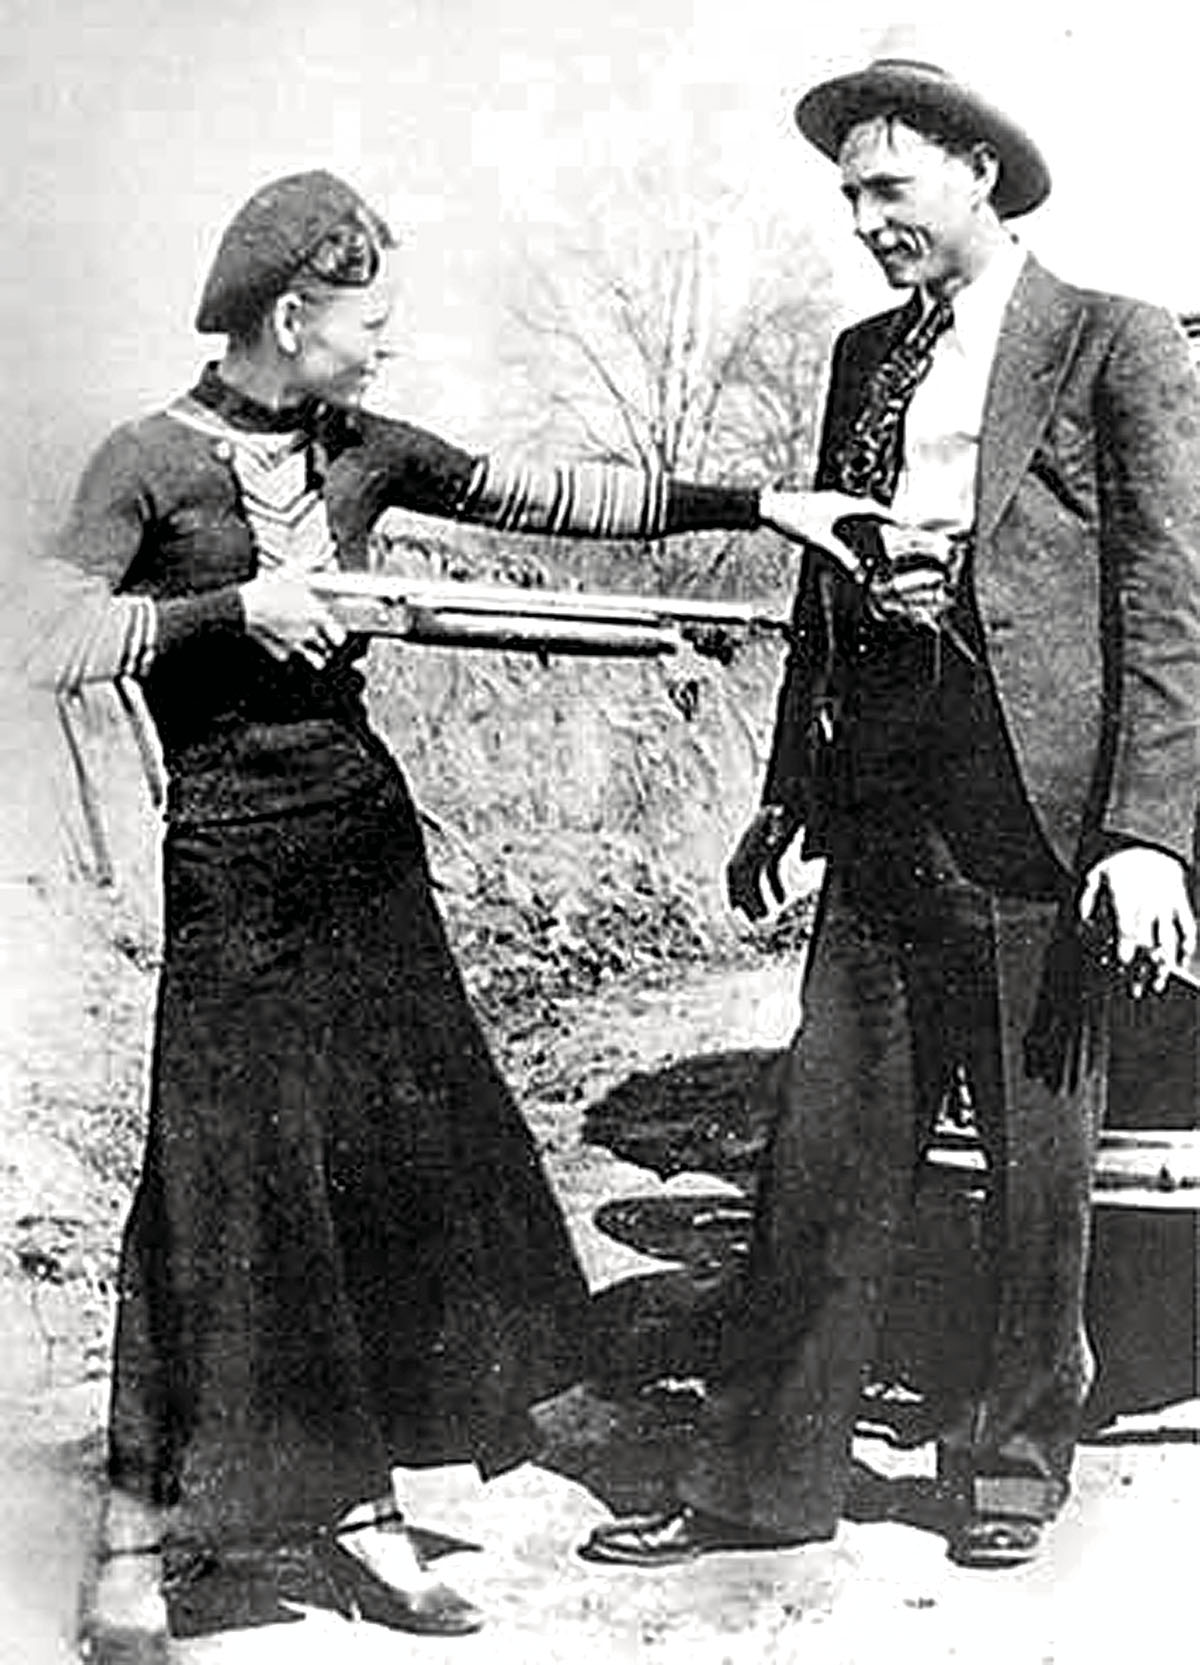 Bonnie holds Clyde at gunpoint while joking around for the camera in 1933